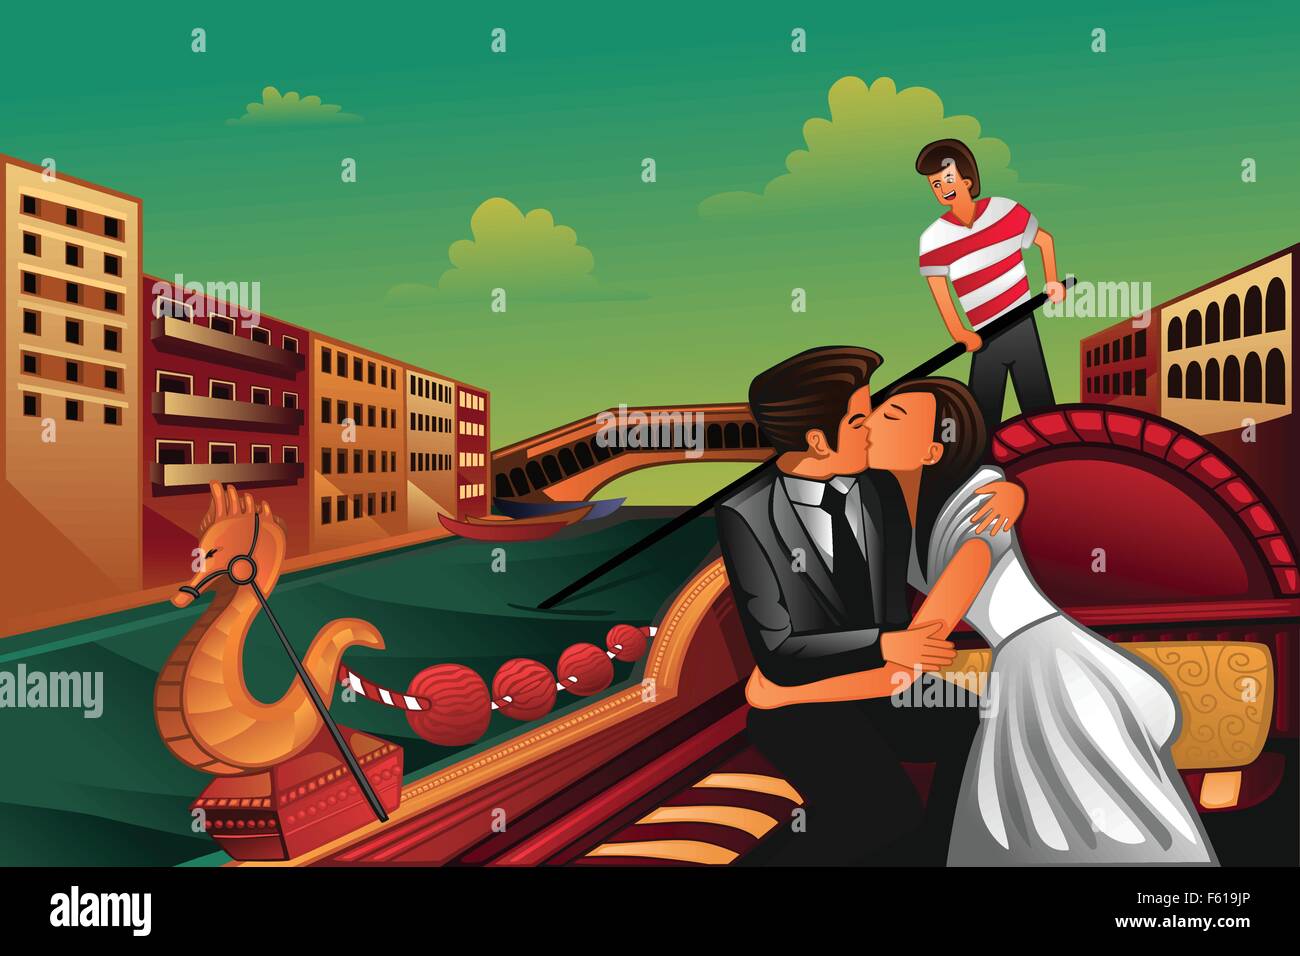 A vector illustration of romantic young couple kissing on boat Stock Vector